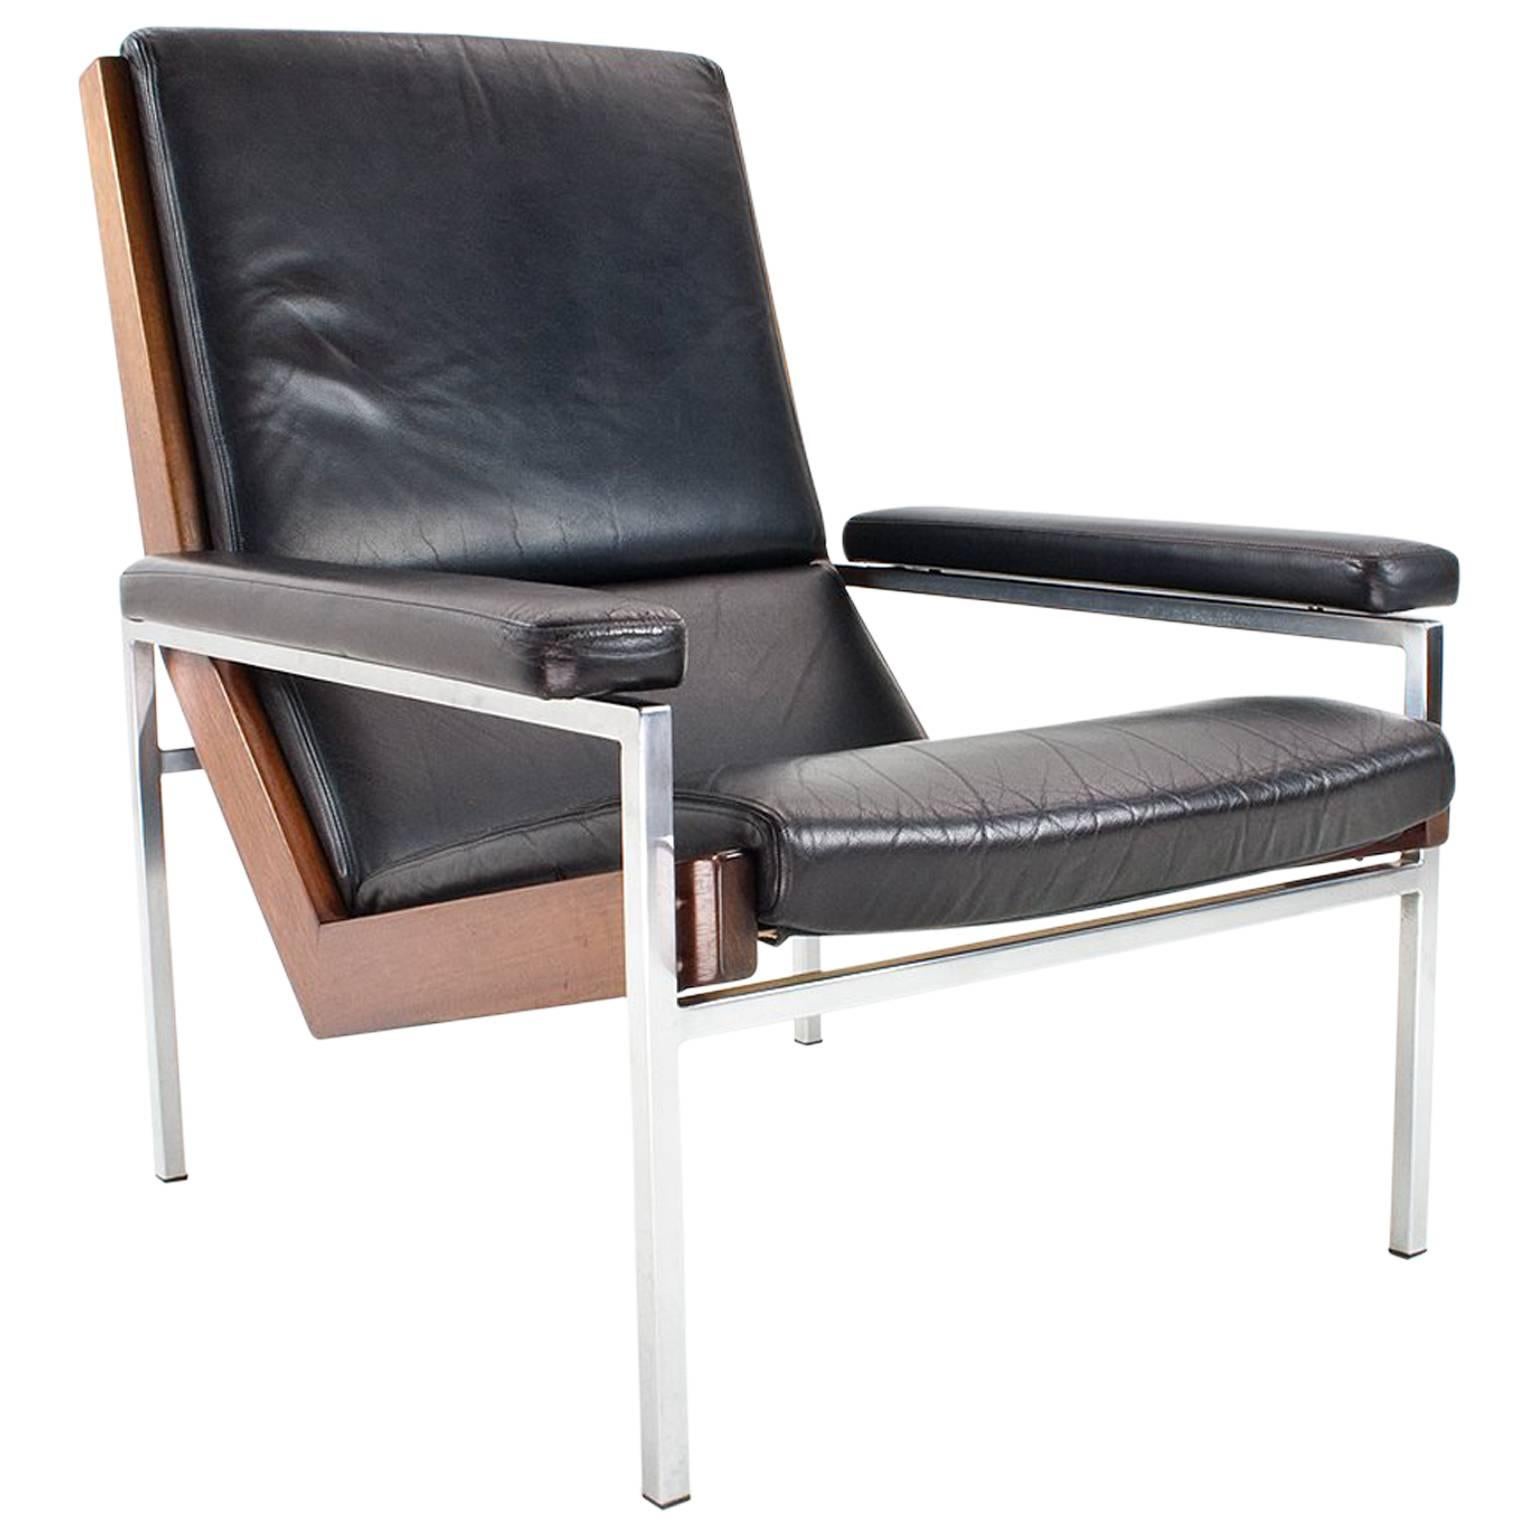 Lounge Chair in Leather by Rob Parry 1960s Dutch Vintage Collectable